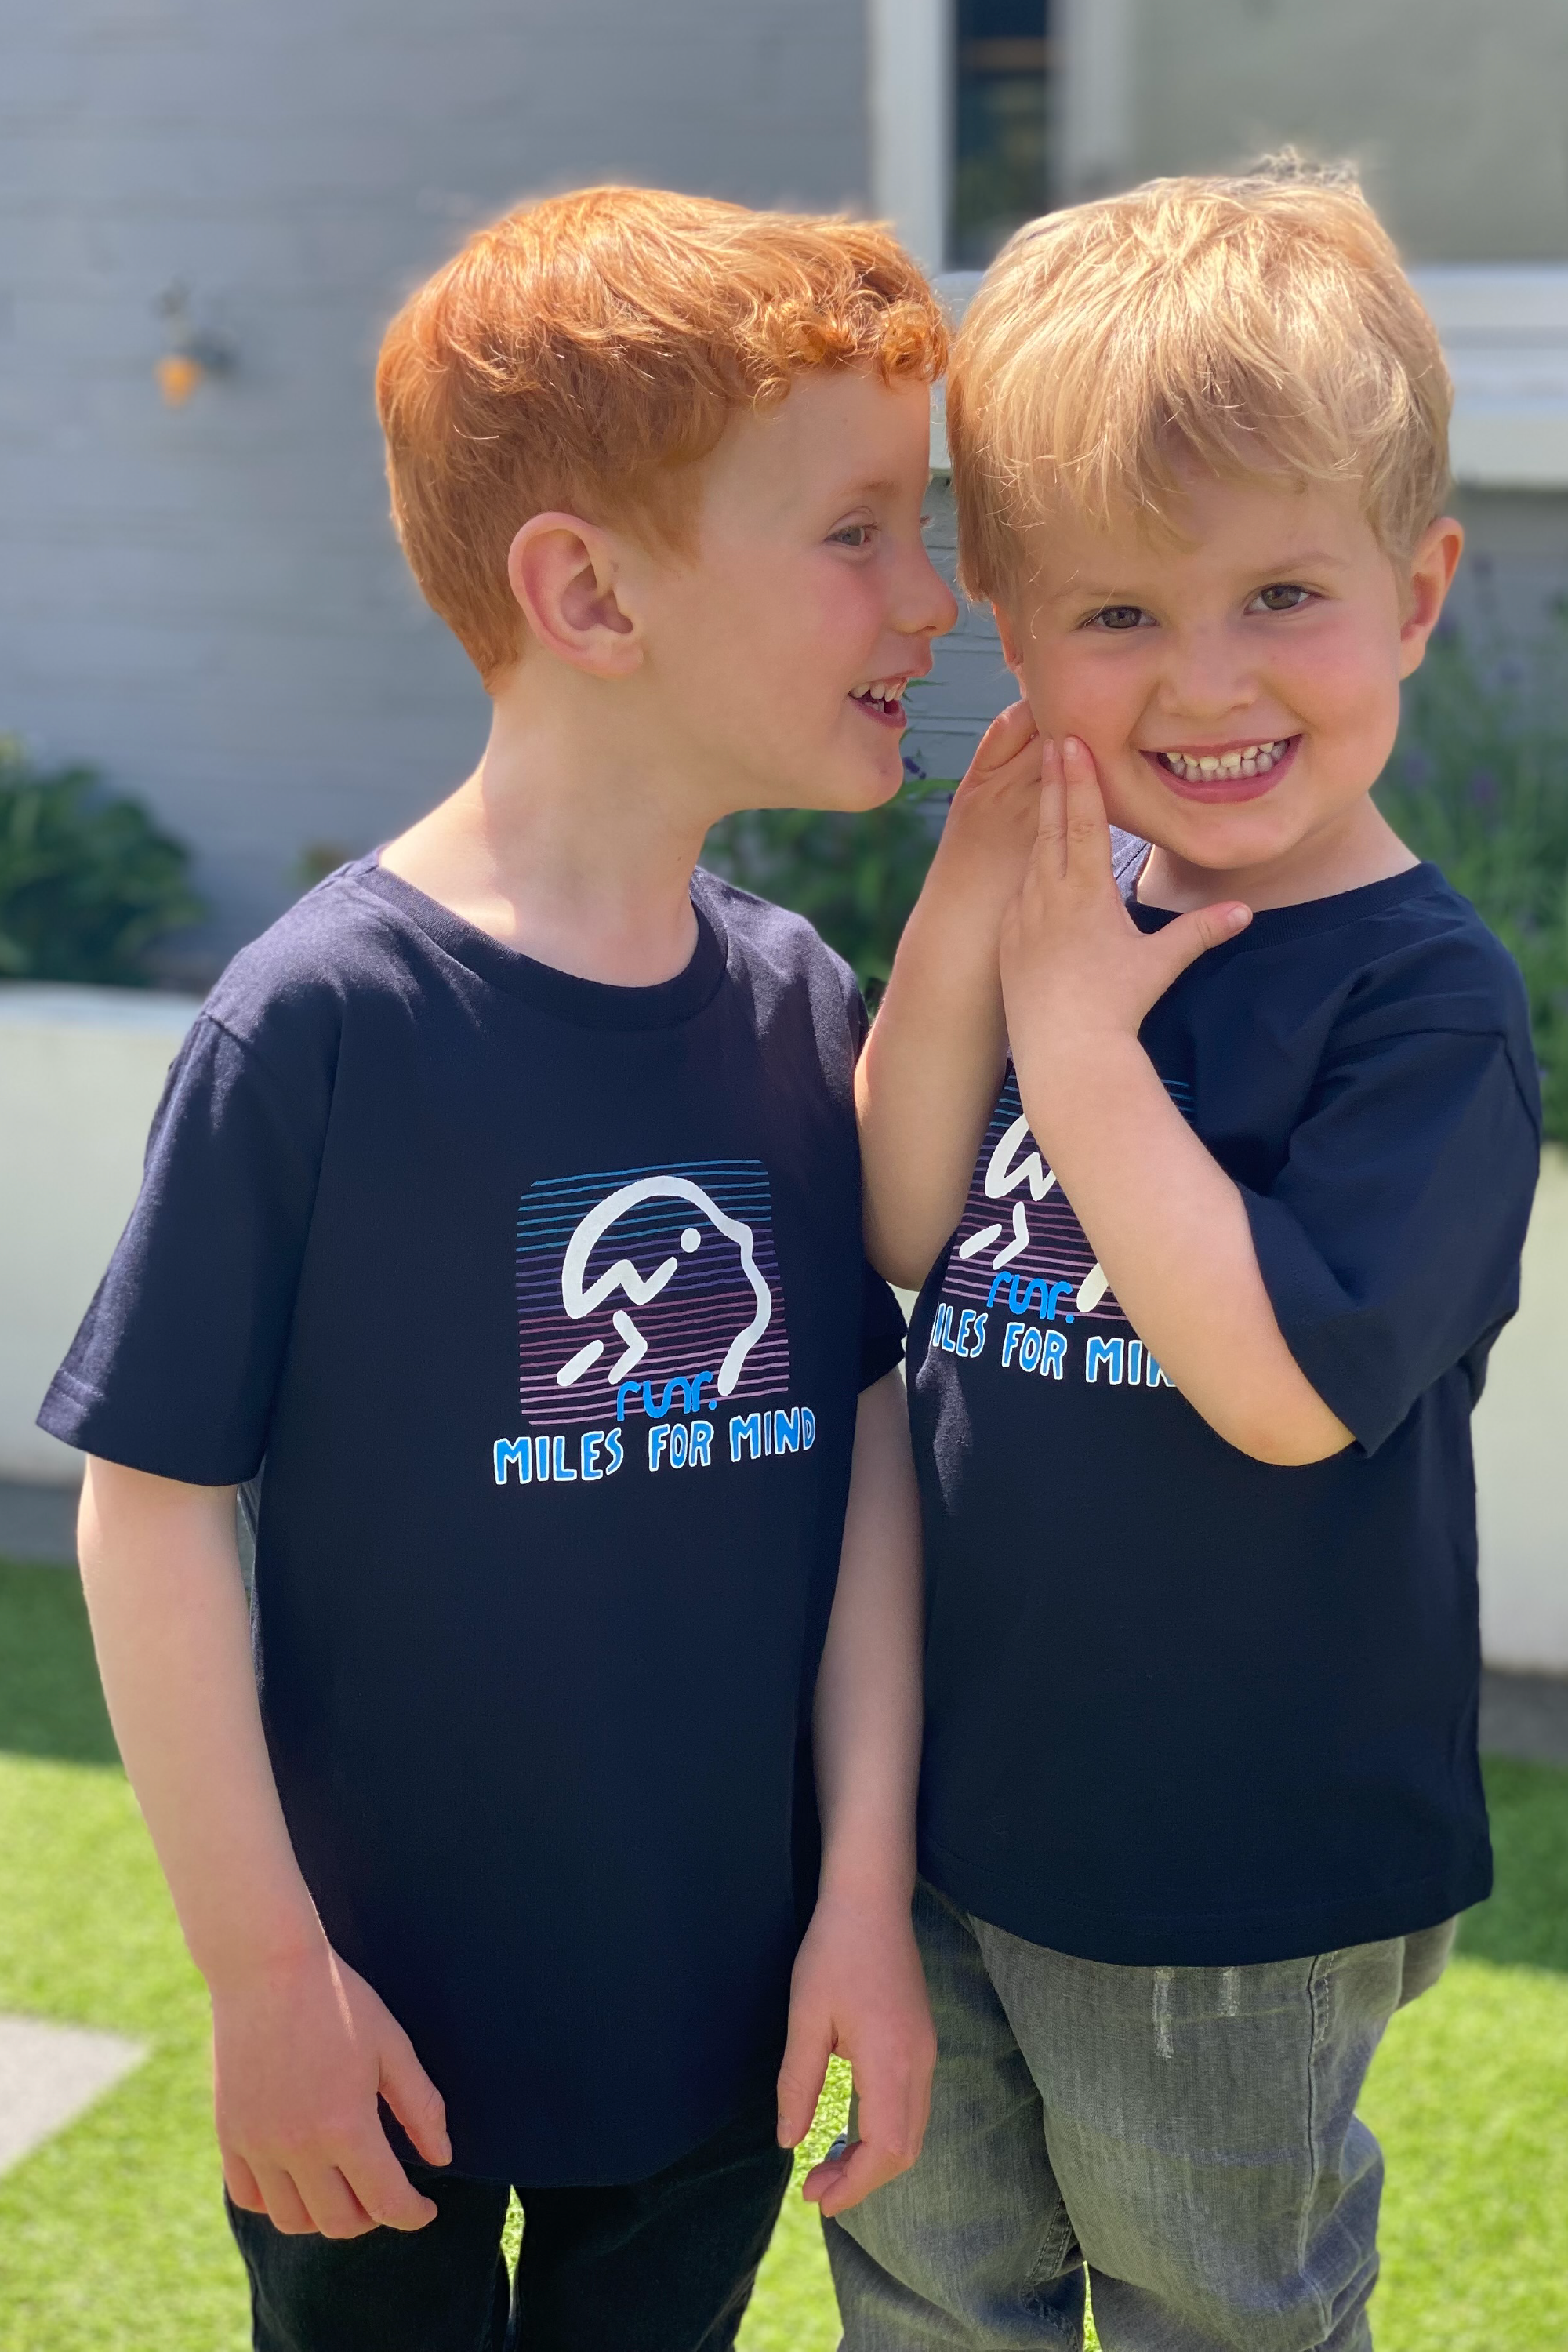 Junior 'Miles For Mind' T-Shirts